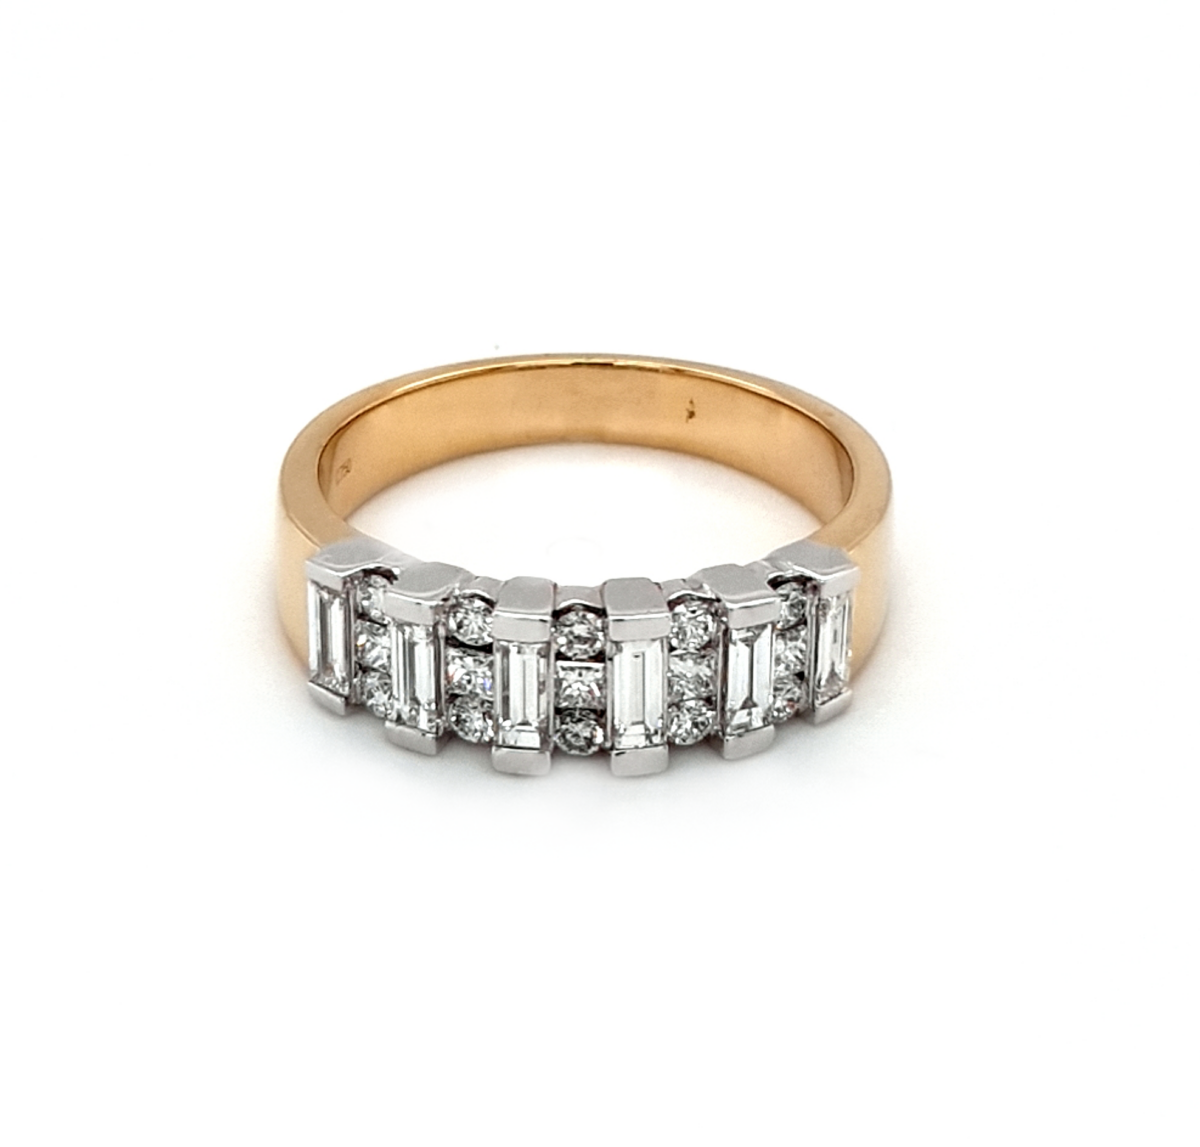 Leon Bakers 18K Yellow and White Gold Diamond Ring_0